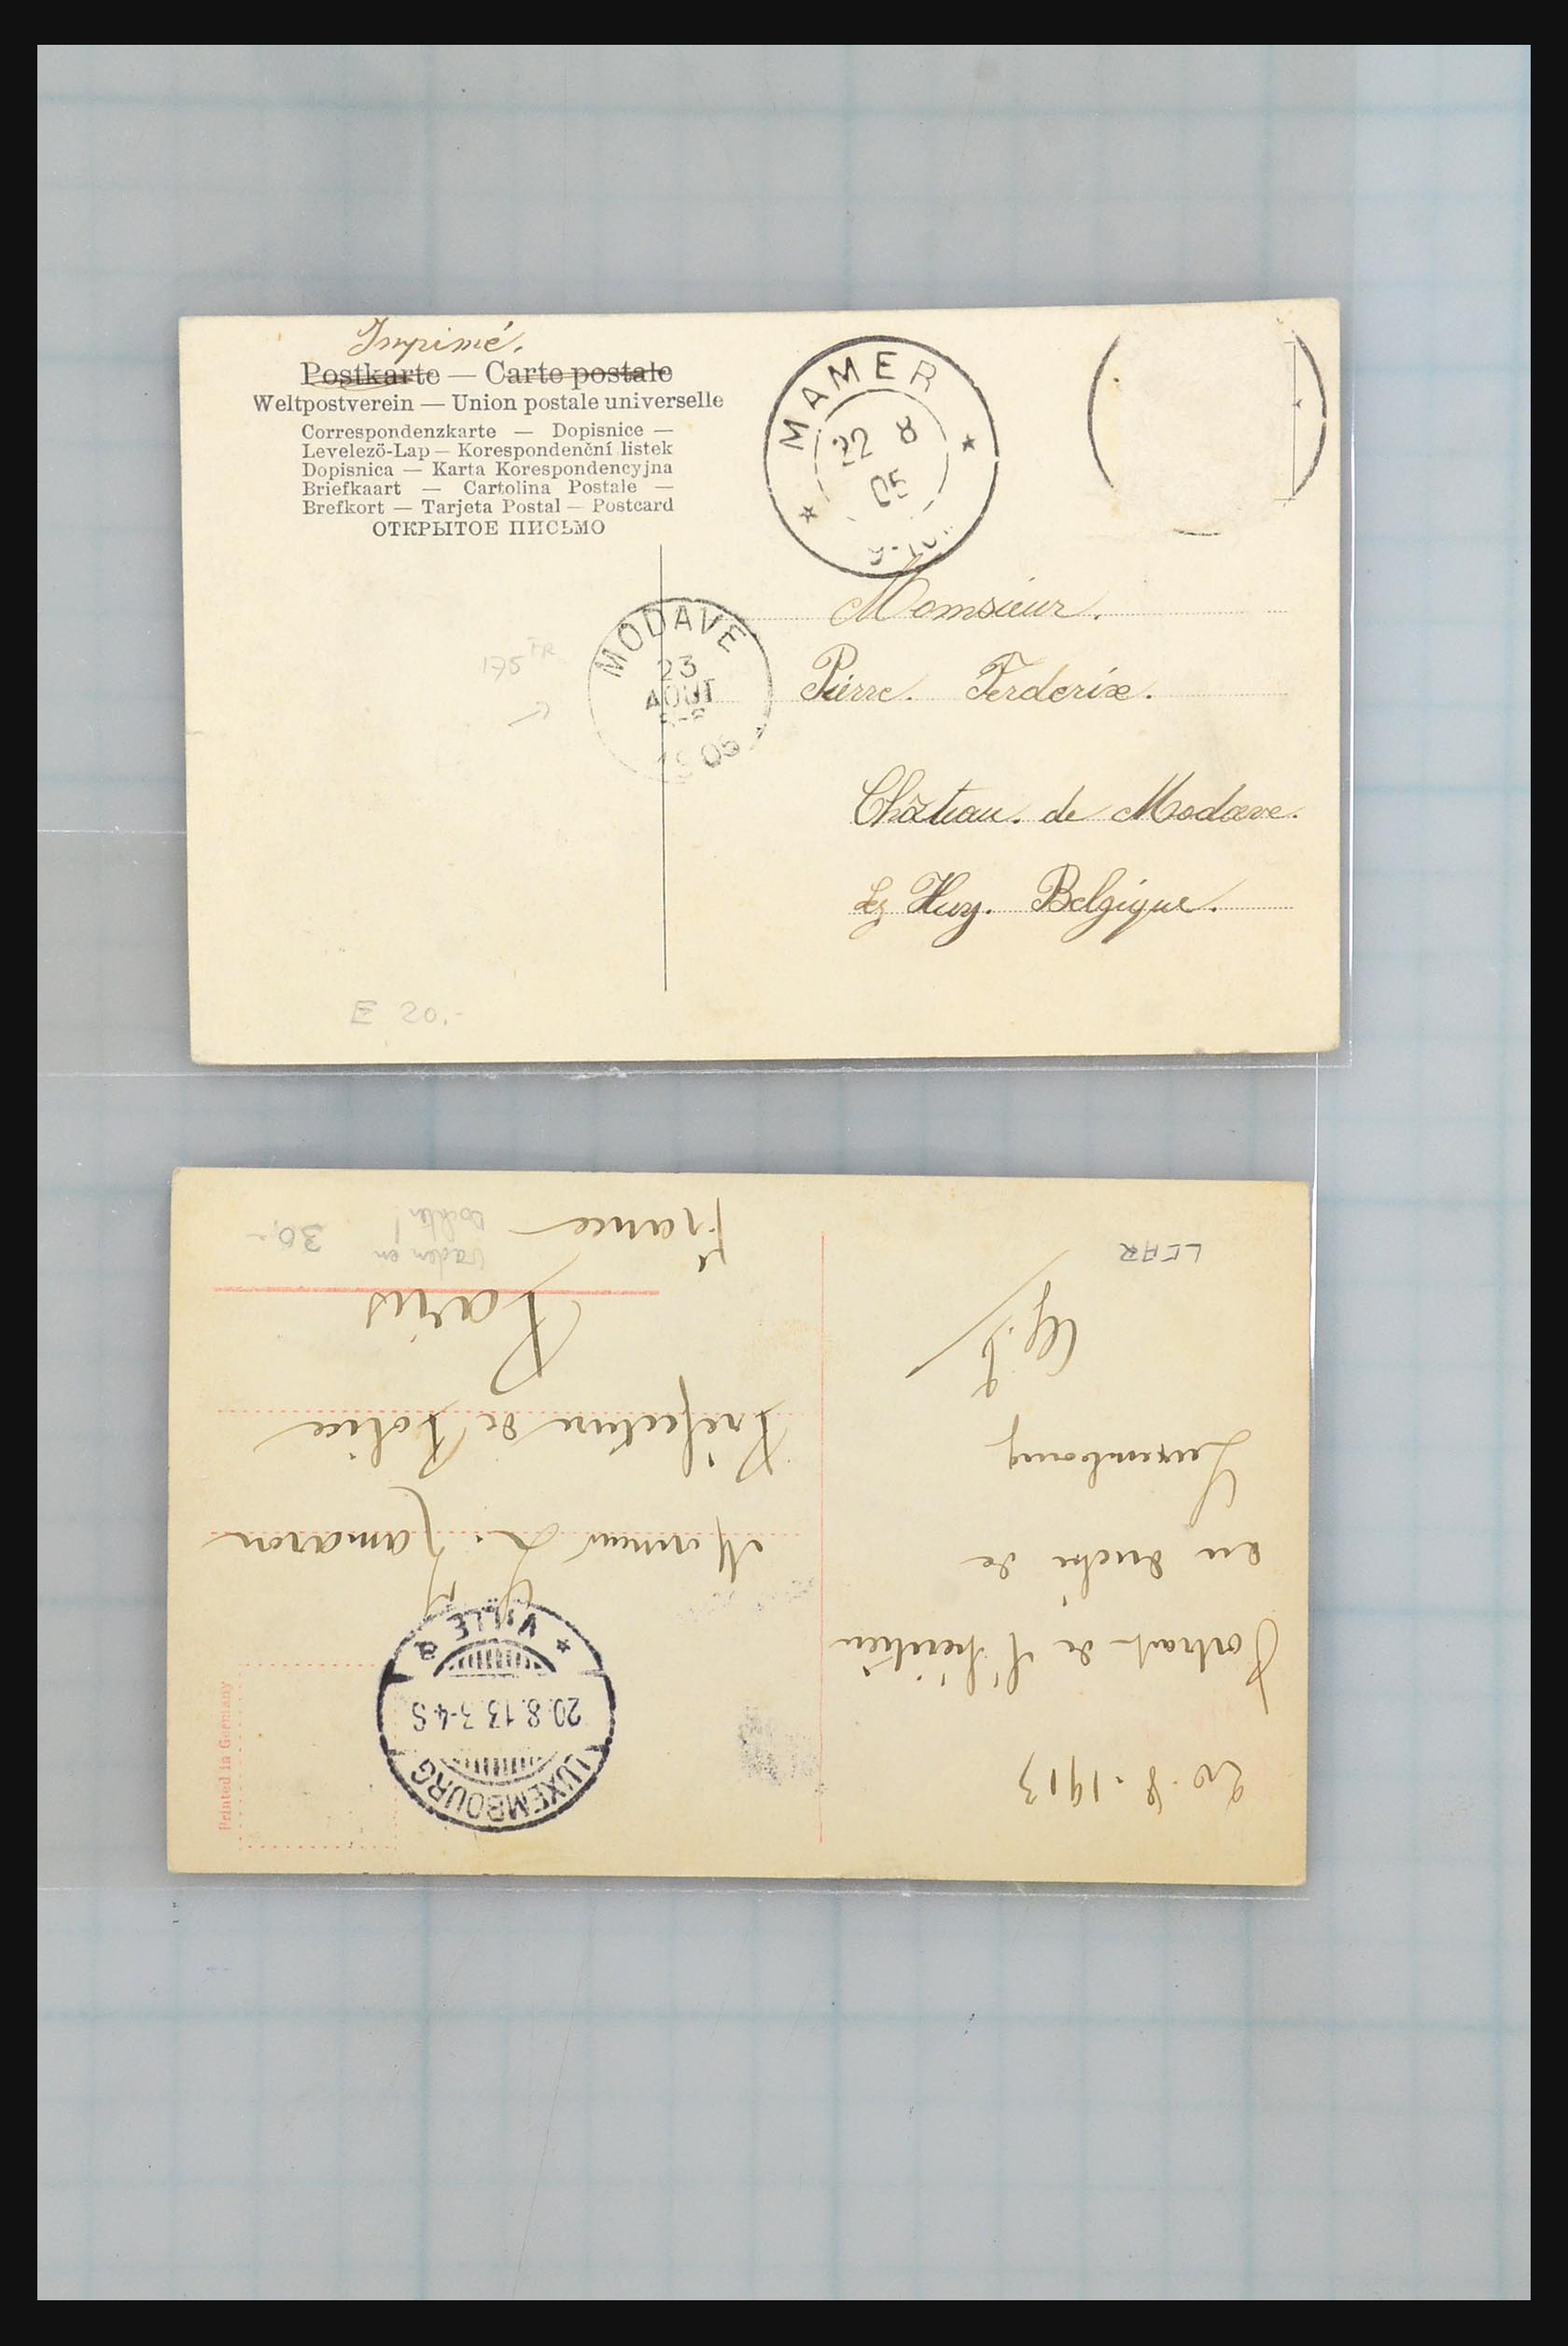 31358 017 - 31358 Portugal/Luxemburg/Greece covers 1880-1960.